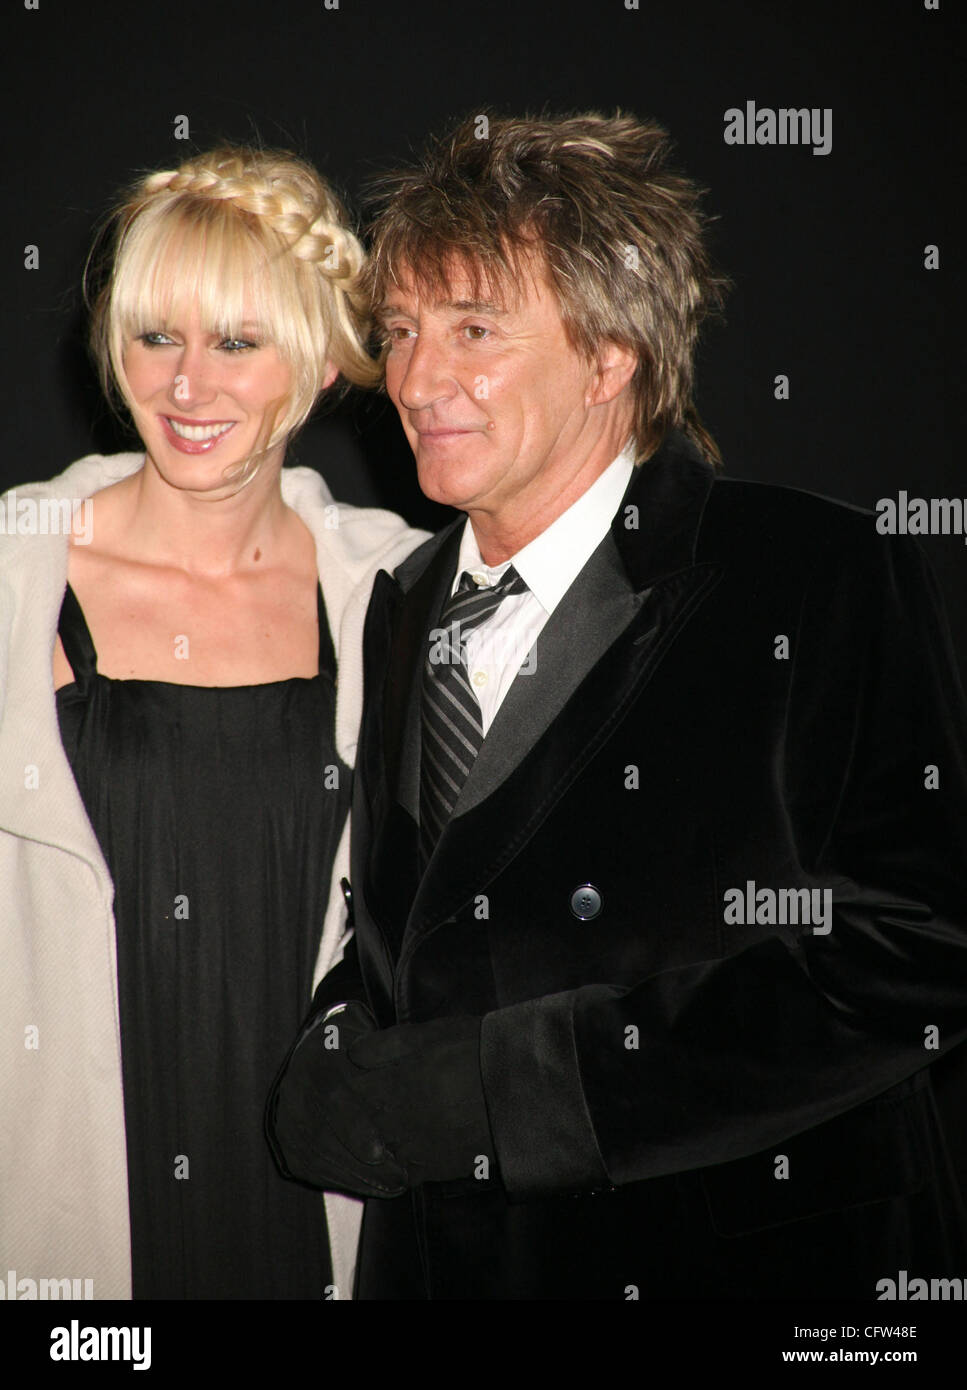 Feb 05, 2007; New York, NY, USA; Singer ROD STEWART and his daughter KIMBERLY STEWART at the arrivals for the Marc Jacobs fashion show held during Mercedes-Benz Fashion Week Fall 2007 at the  Lexington Armory. Mandatory Credit: Photo by Nancy Kaszerman/ZUMA Press. (?) Copyright 2007 by Nancy Kaszerm Stock Photo